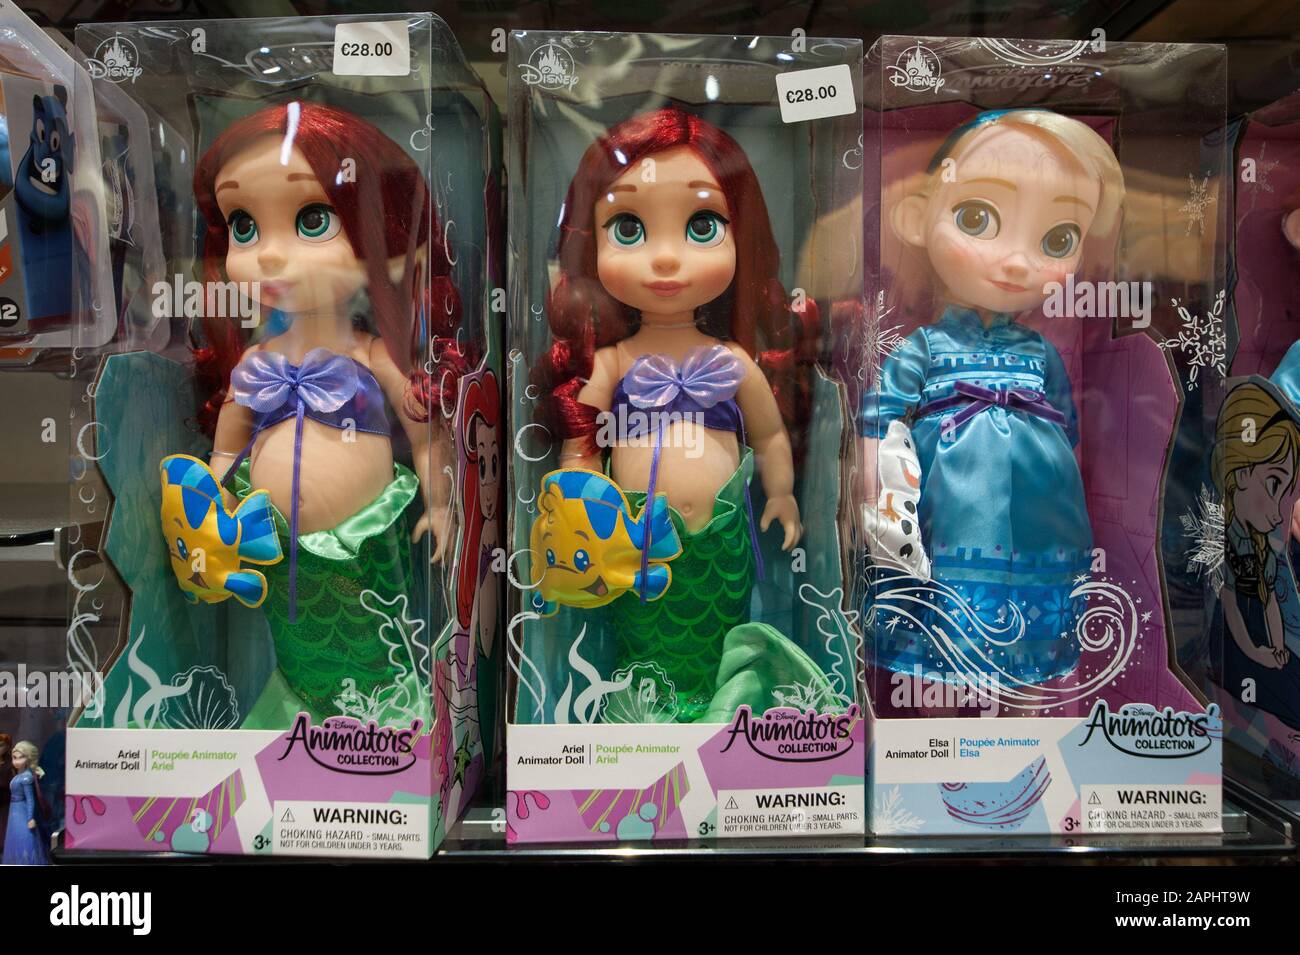 Florence, Italy - 2020, Jan 19: Animator dolls (Ariel and Elsa) on the shelf, in a Disney store. Original package. Stock Photo